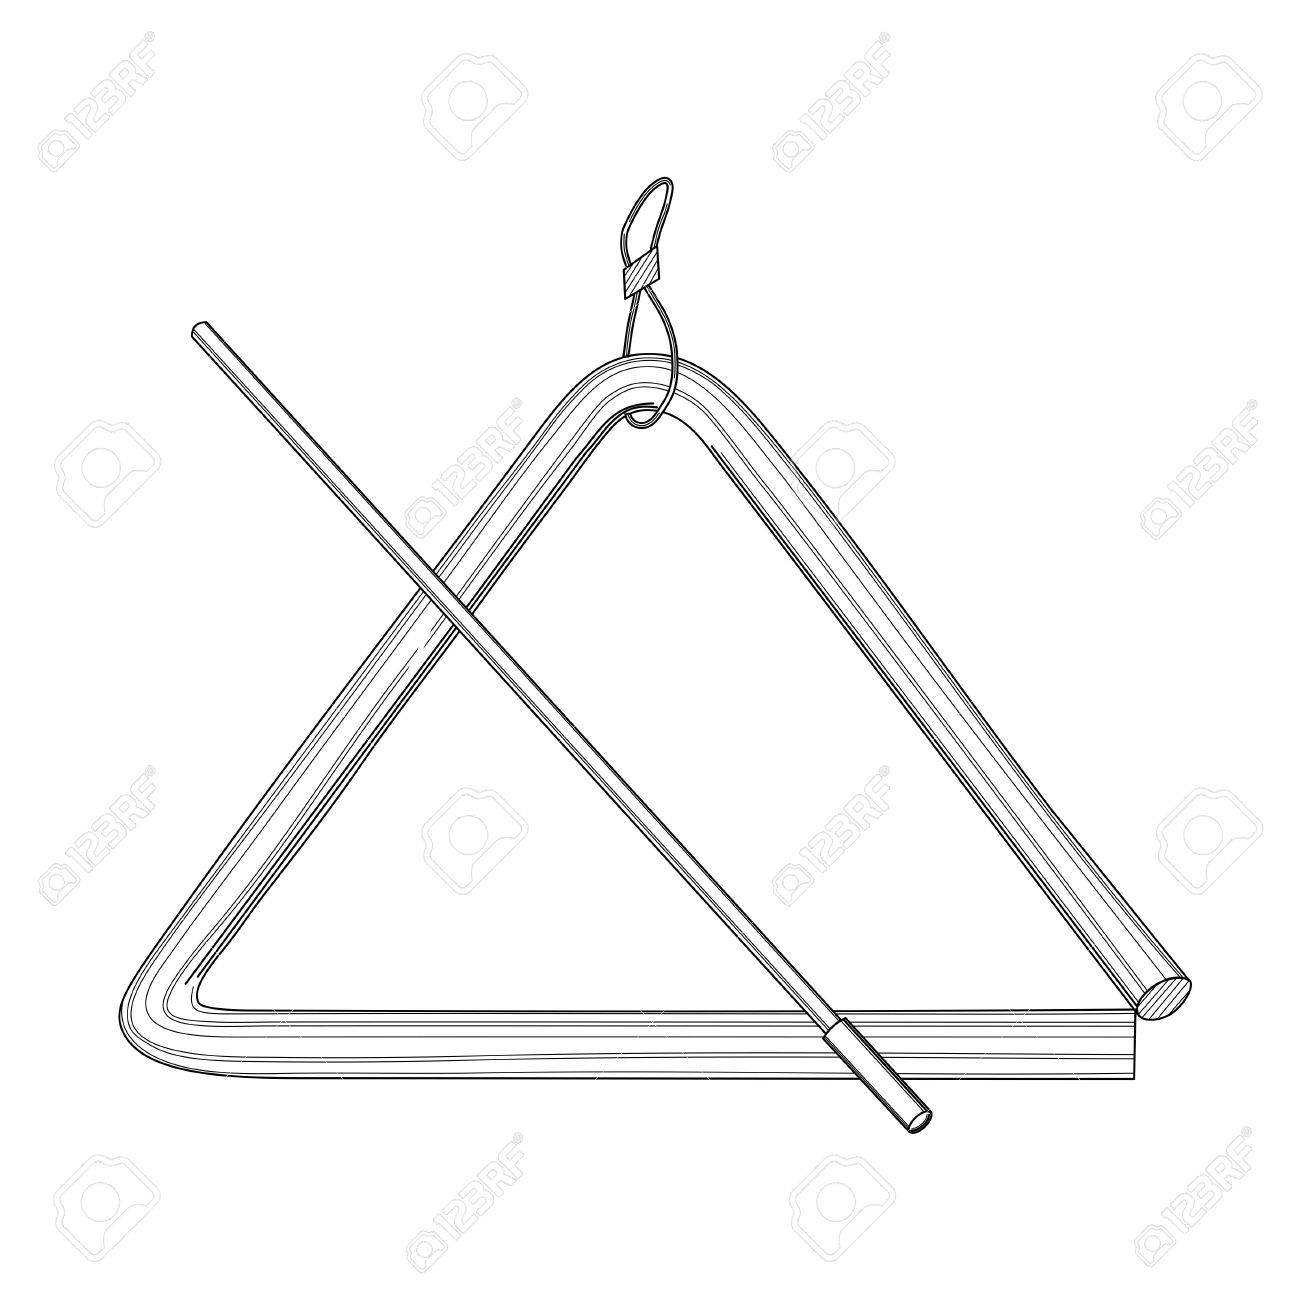 Triangle instrument clipart.